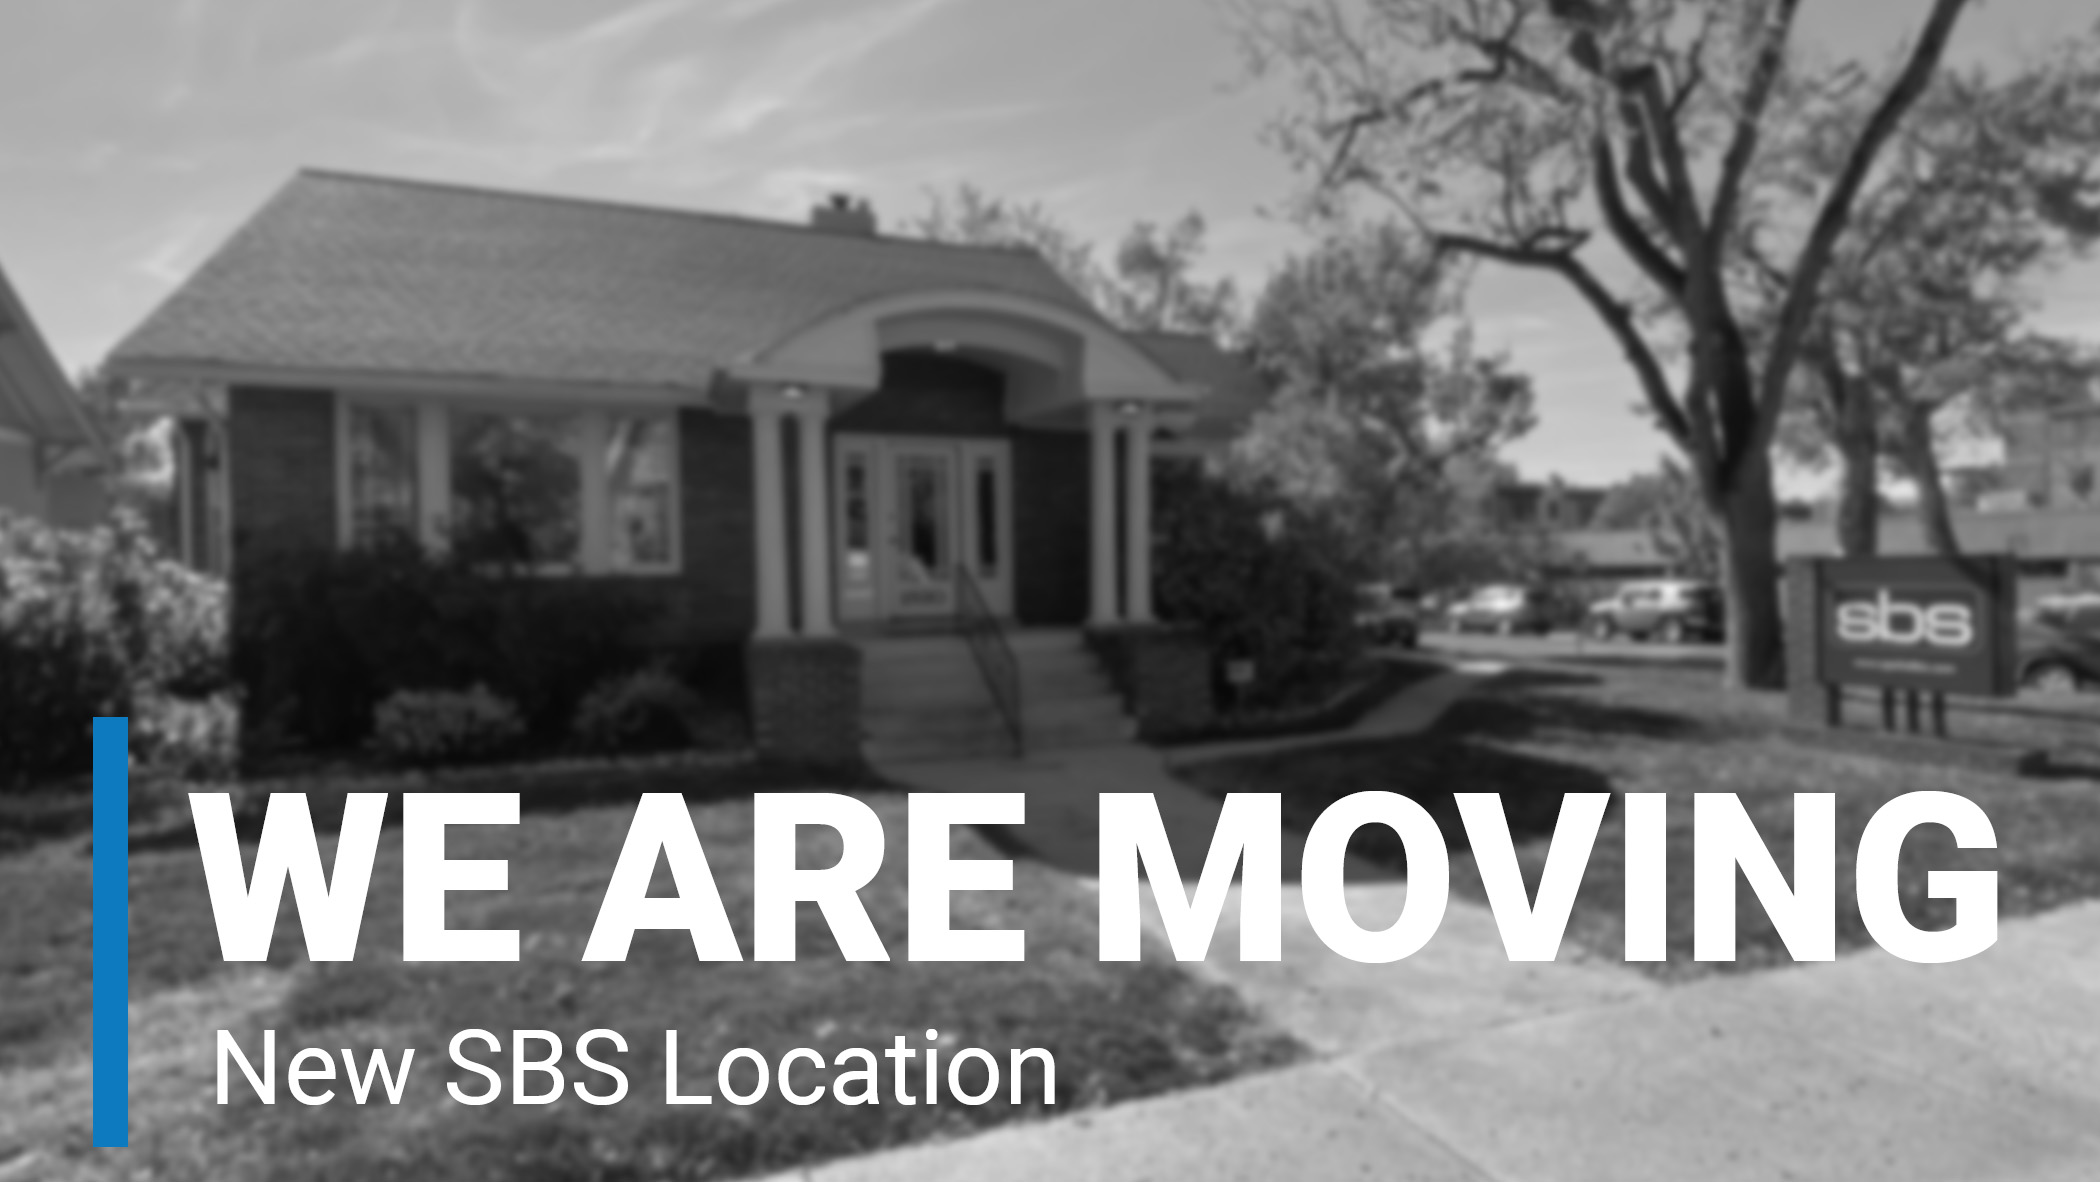 SBS Moving in to New Location